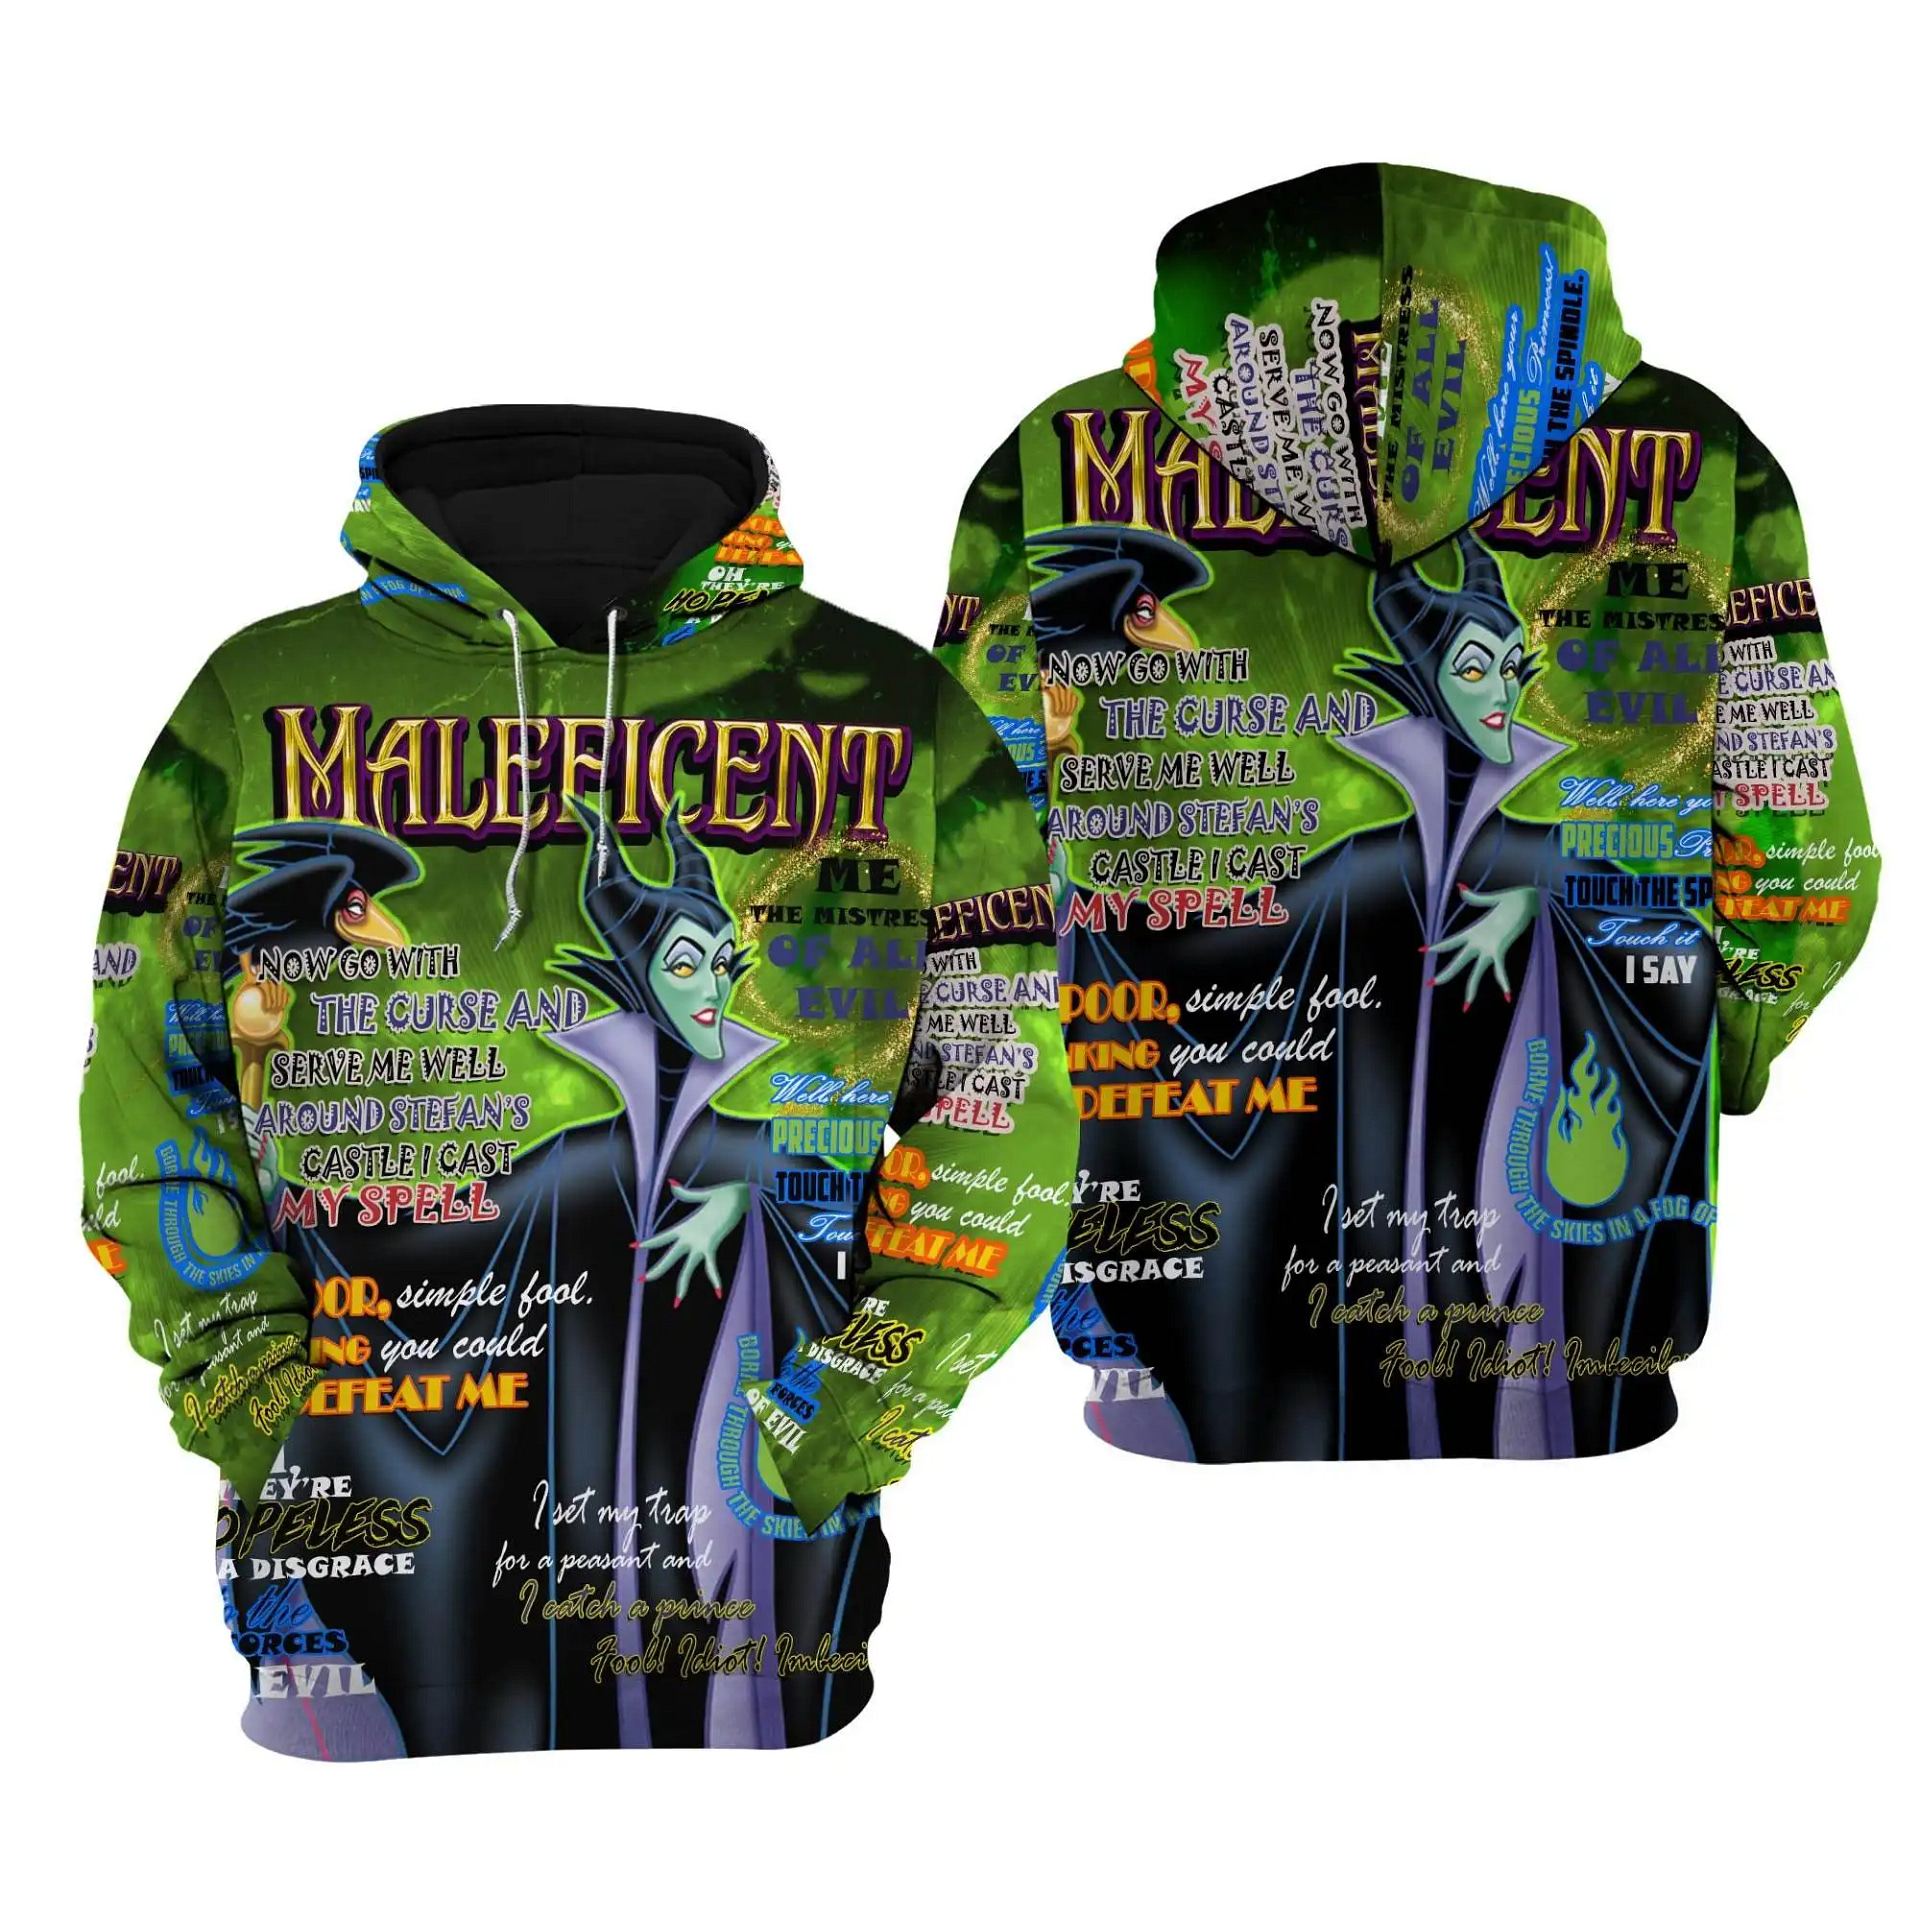 Maleficent Punk Words Pattern Disney Quotes Cartoon Graphic Outfits Clothing Men Women Kids Toddlers Hoodie 3D